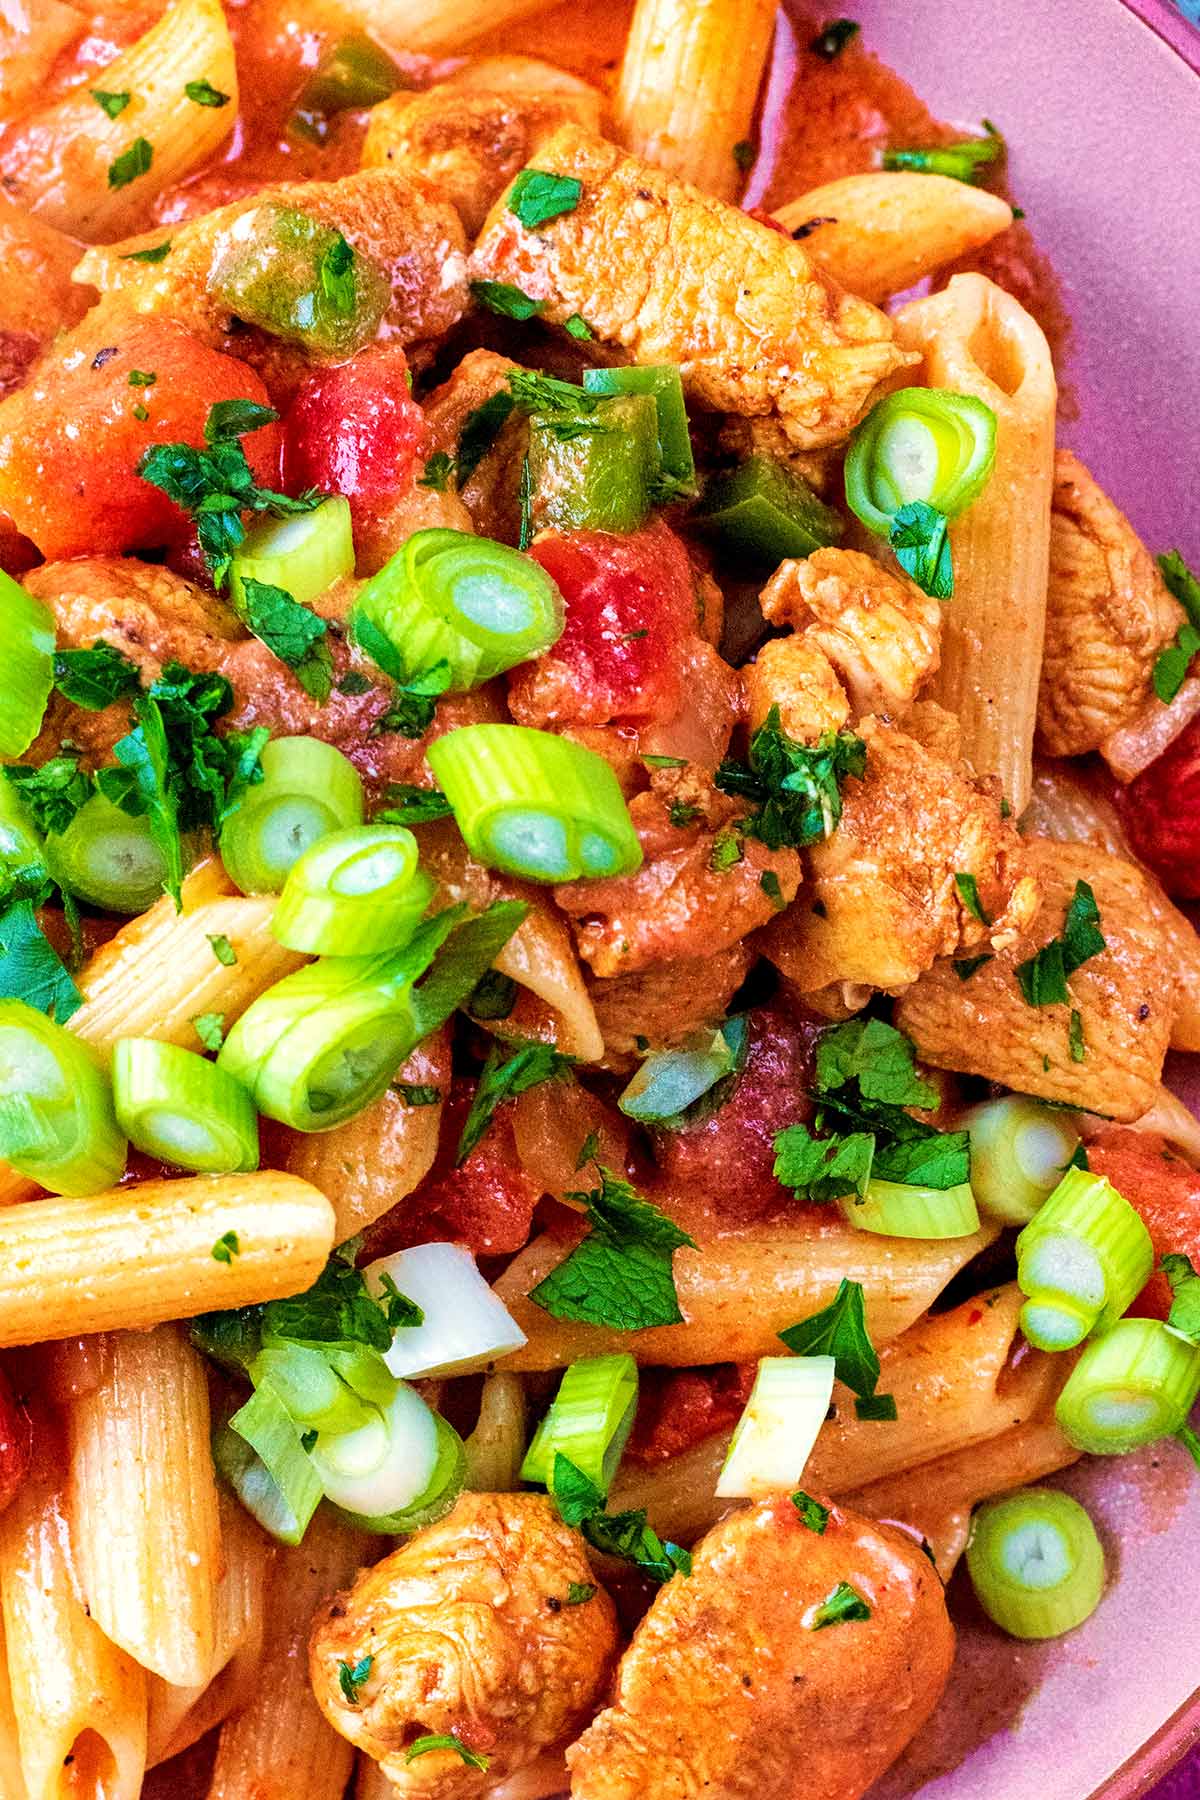 Green onions scattered over penne pasta and chicken in a tomato sauce.